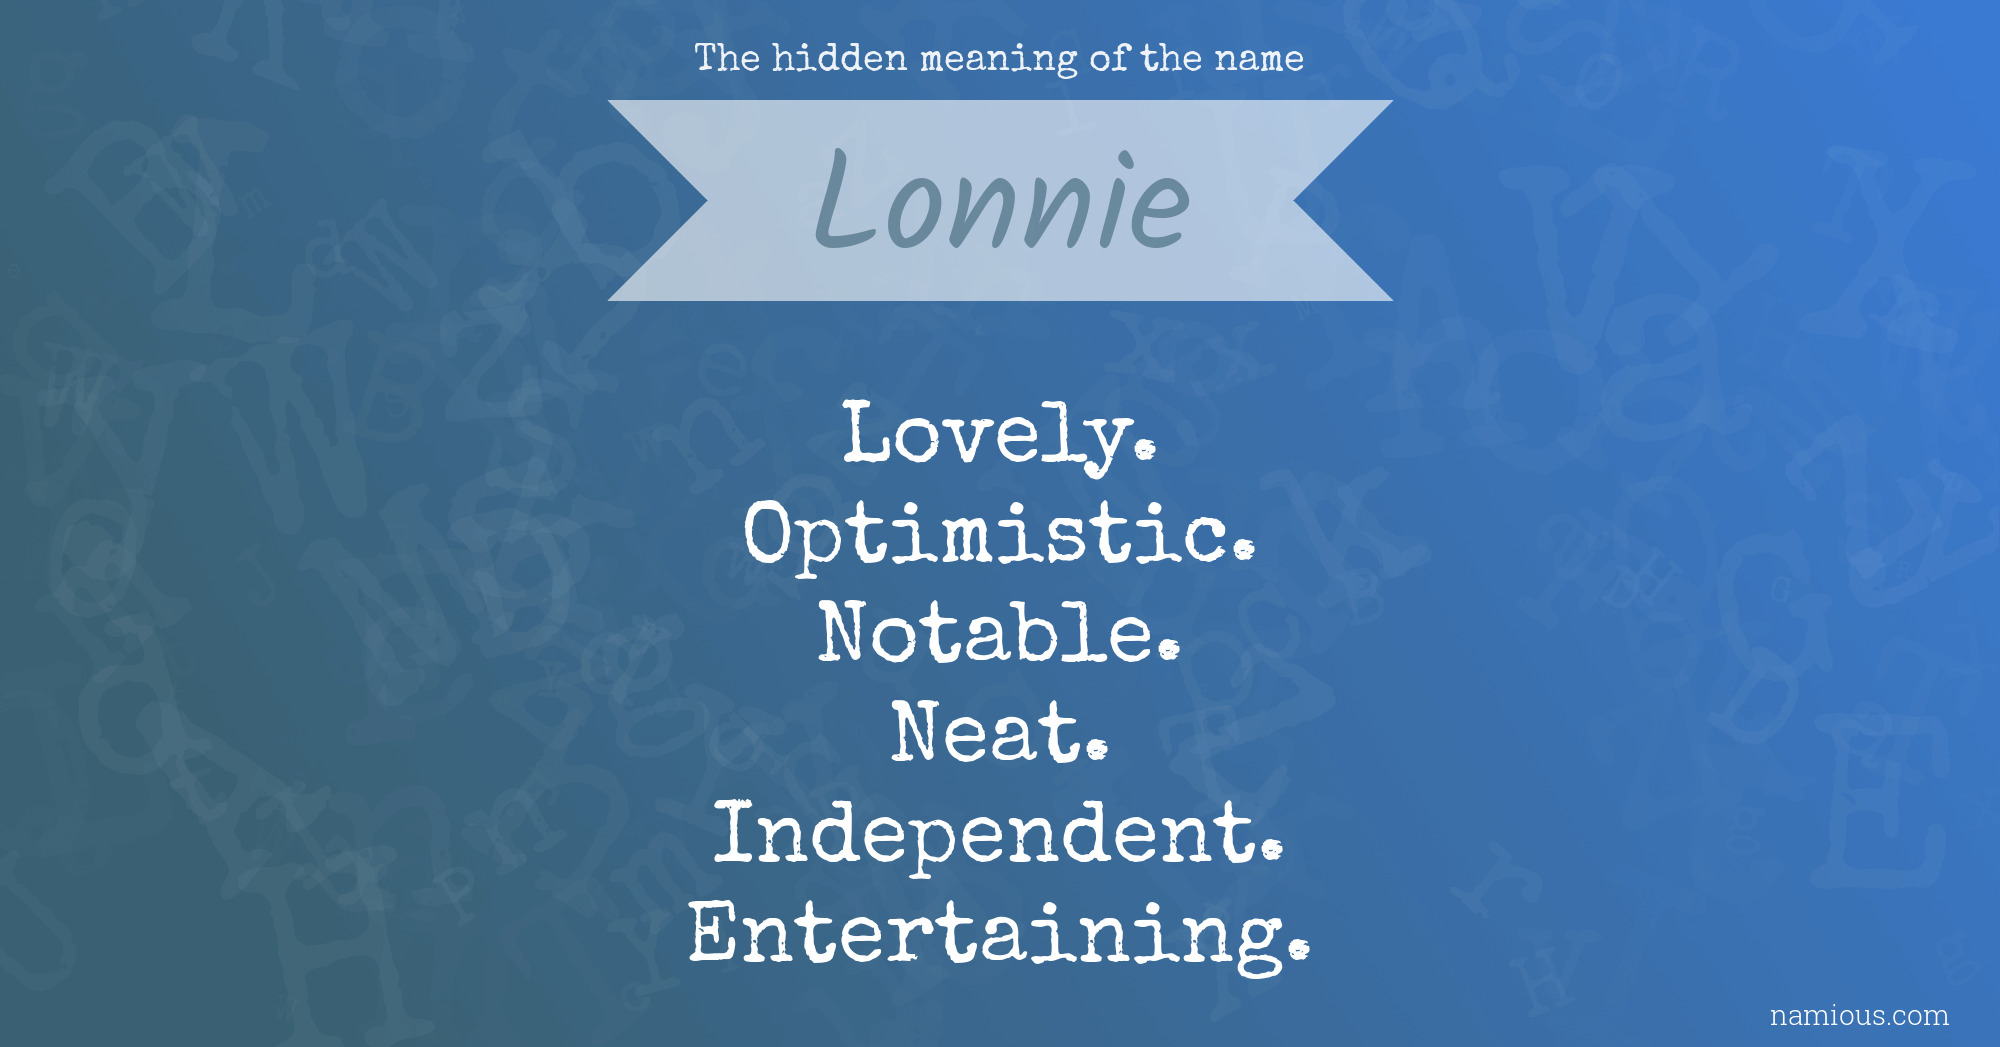 The hidden meaning of the name Lonnie